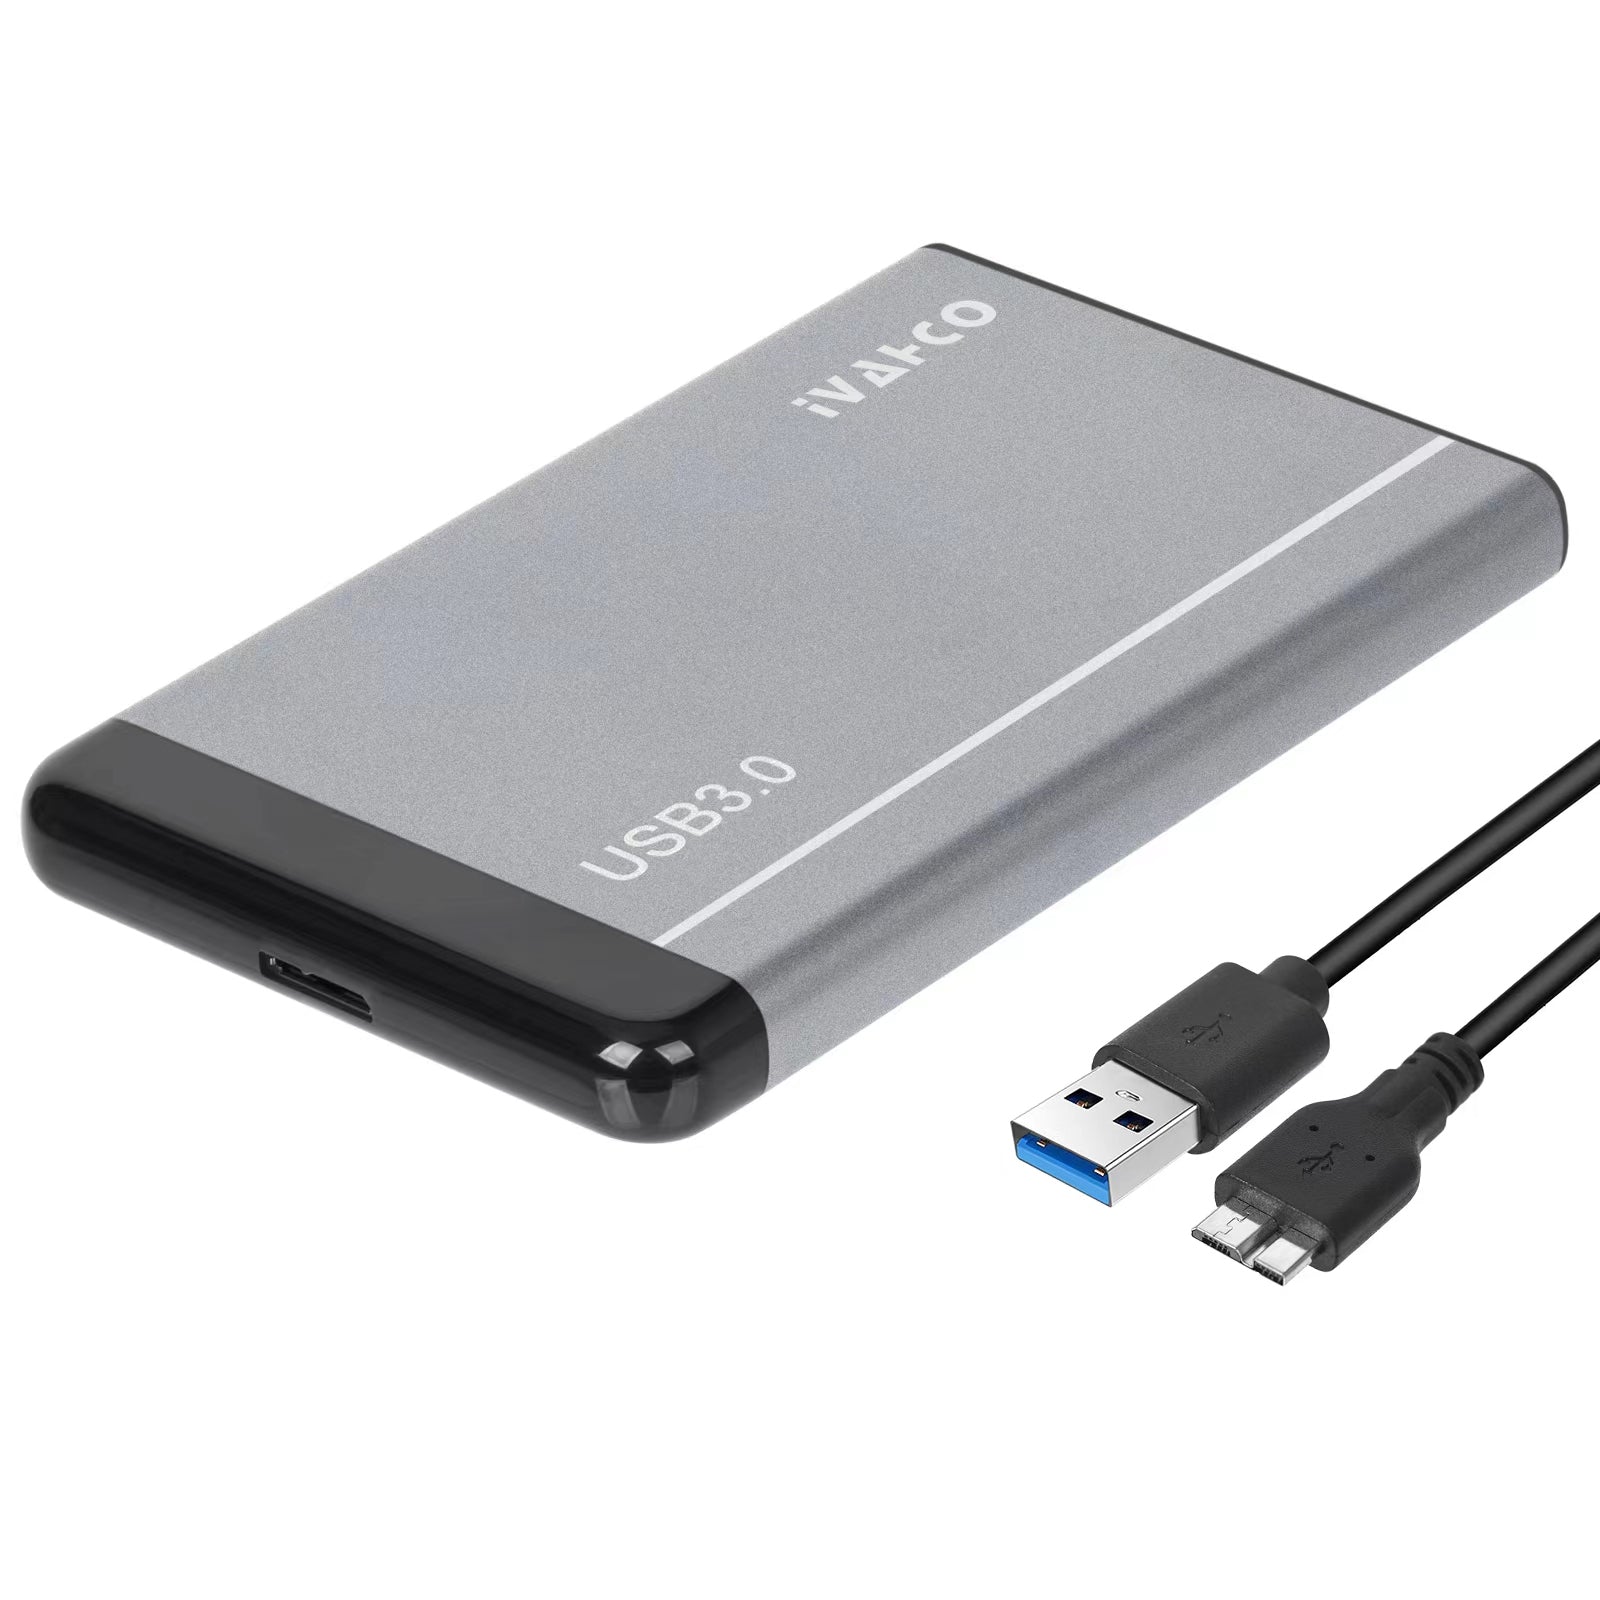 IVAHCO 1TB 2.5" HDD External Case USB3.0 Hard Disk Enclosure Matte Hard Drive Box with Data Cable - Grey